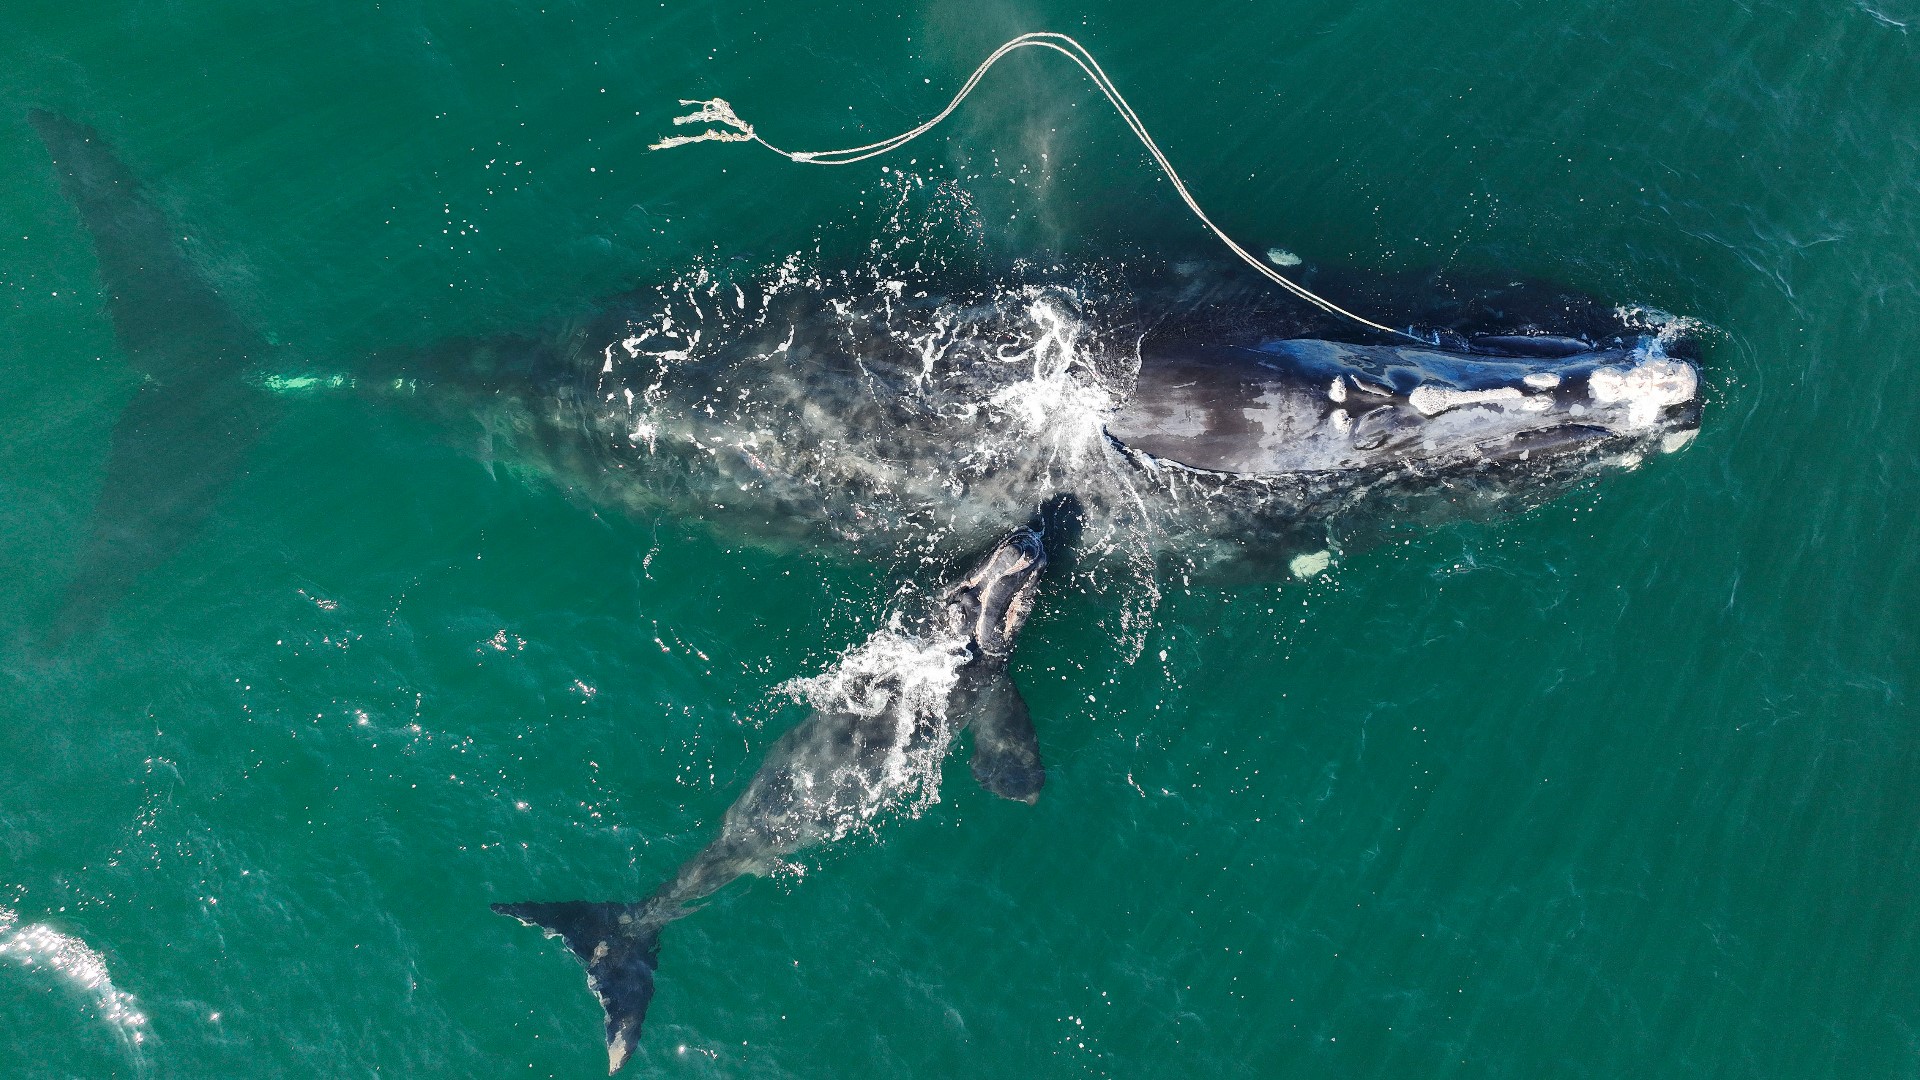 Conservationists attribute the right whales’ continued survival to the U.S. Endangered Species Act that came into force half a century ago.